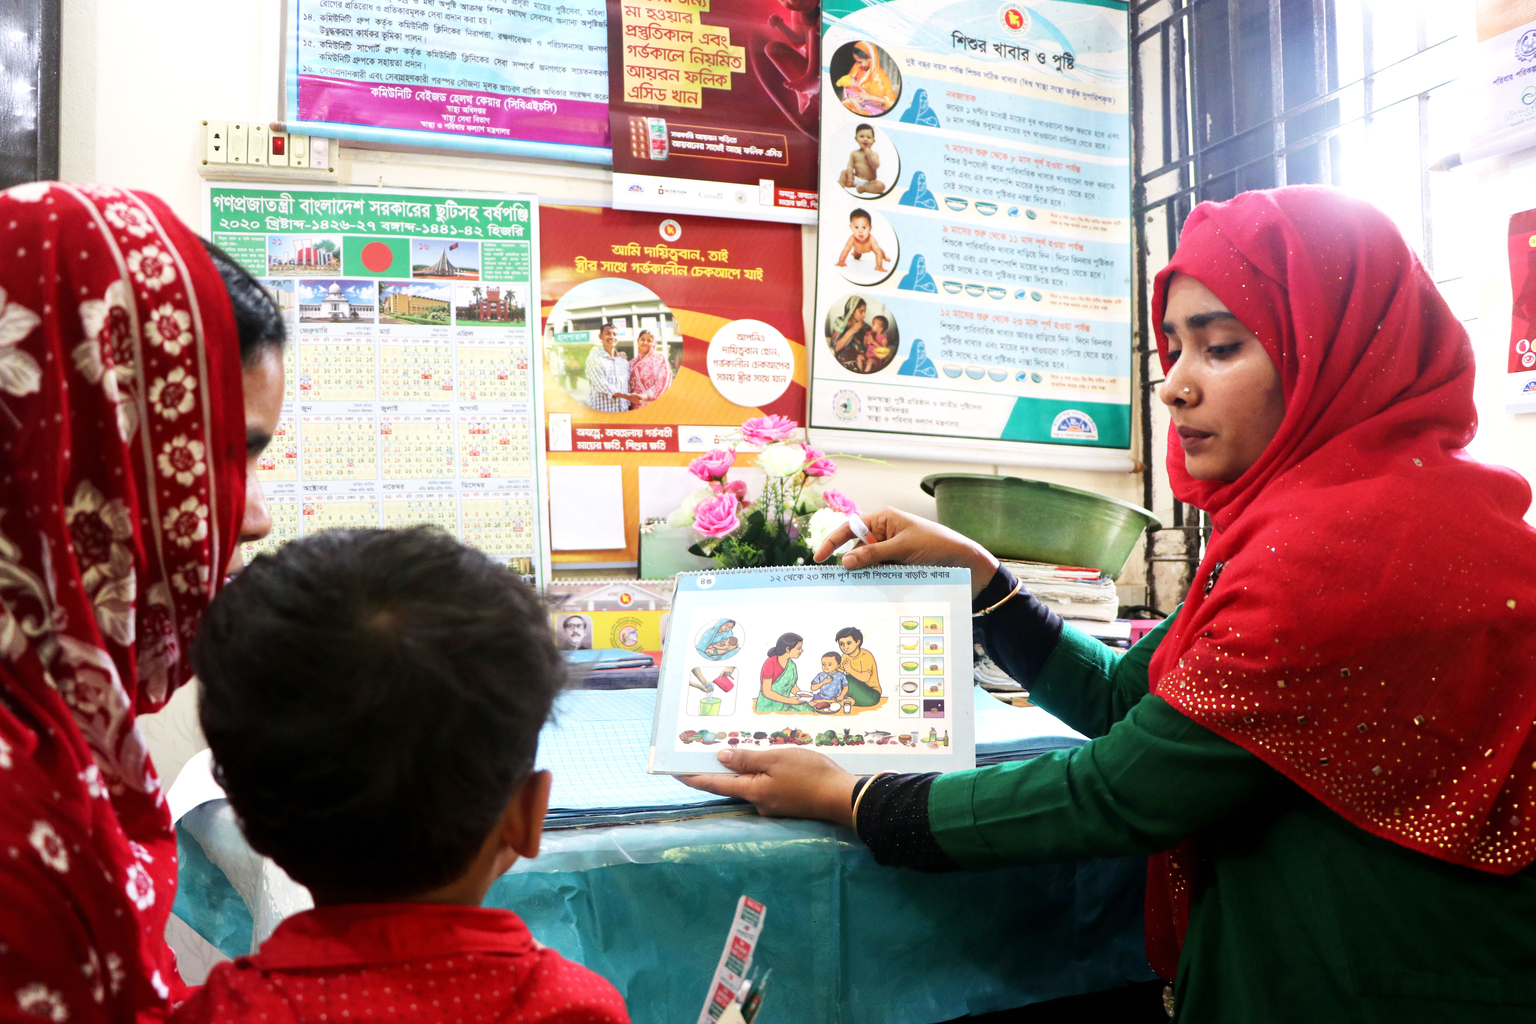 health worker in Bangladesh uses educational materials to explain the importance of health and hygiene to a mother and child